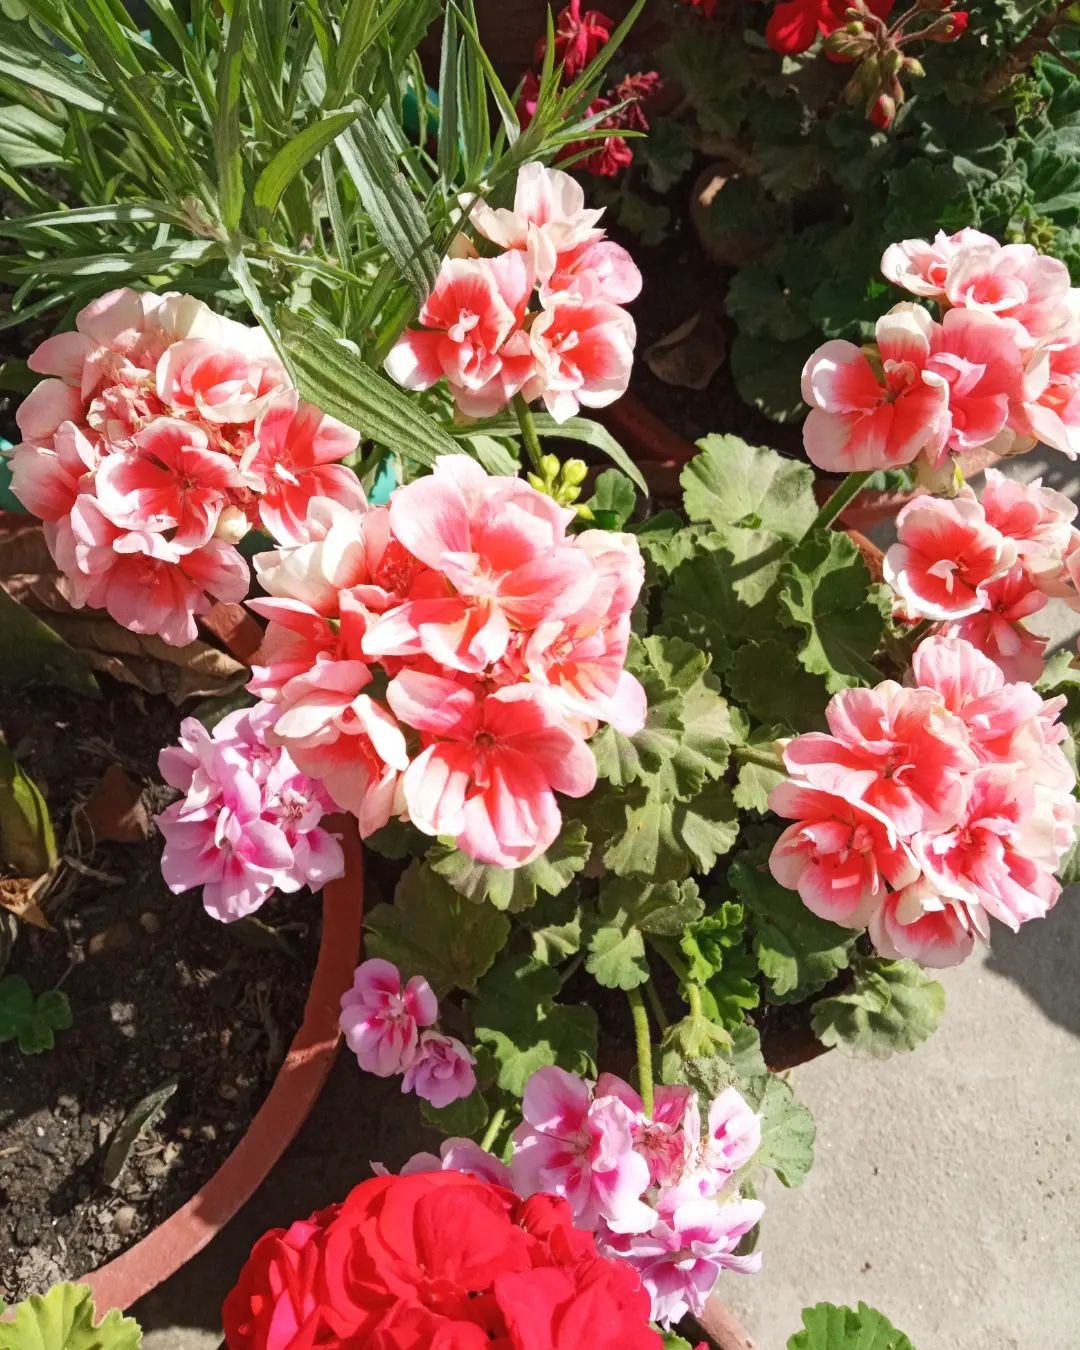  A group of pink and red geranium flowers in pots.